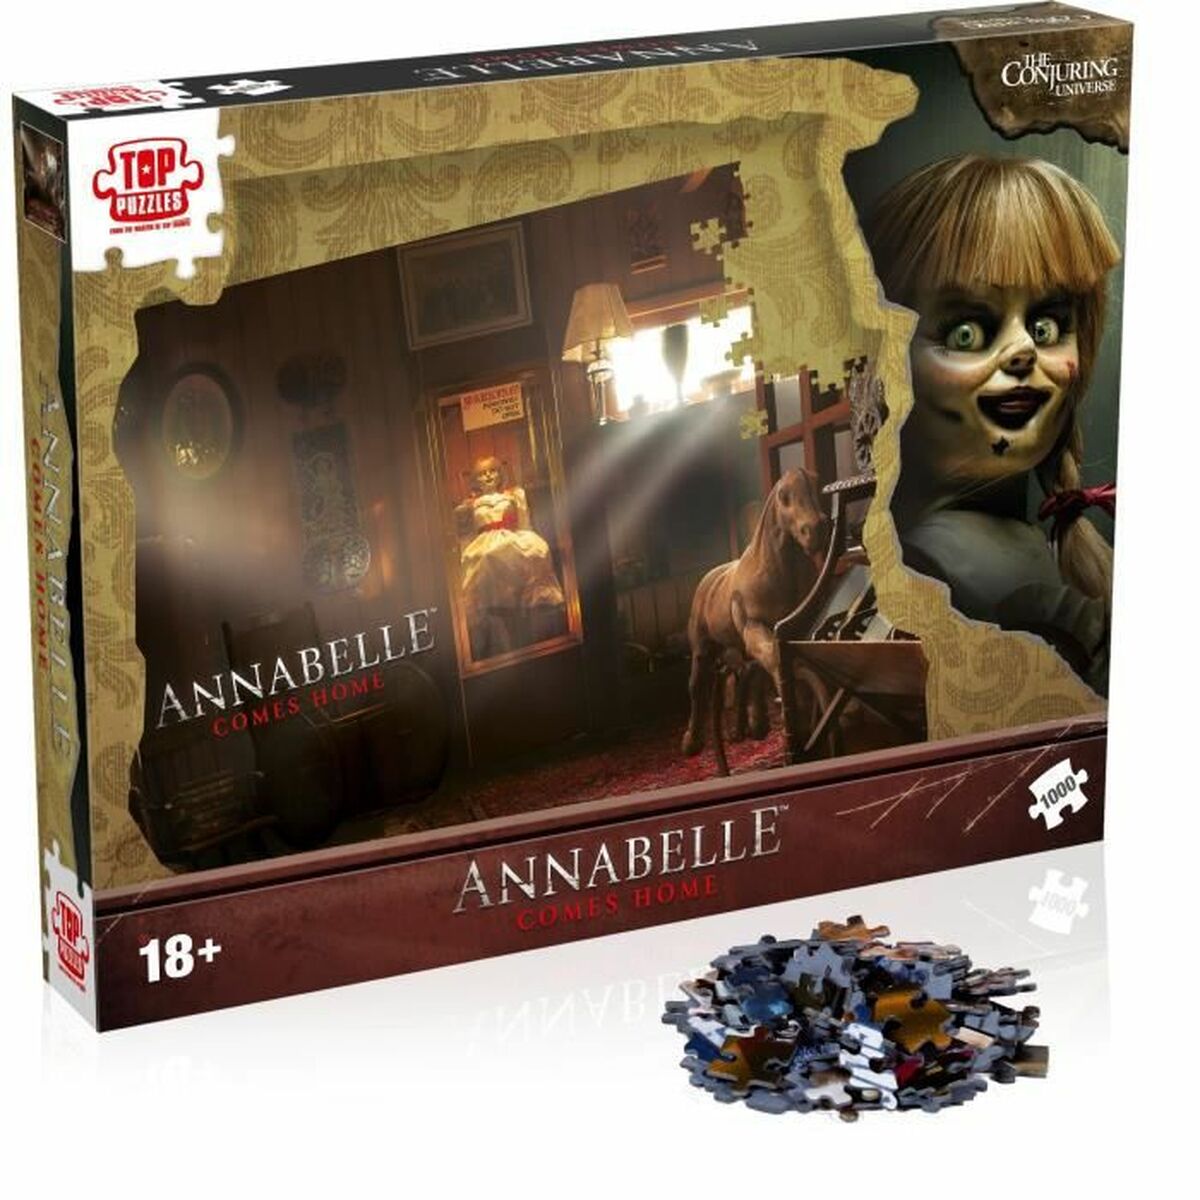 Puzzle Winning Moves Annabelle 1000 Pezzi